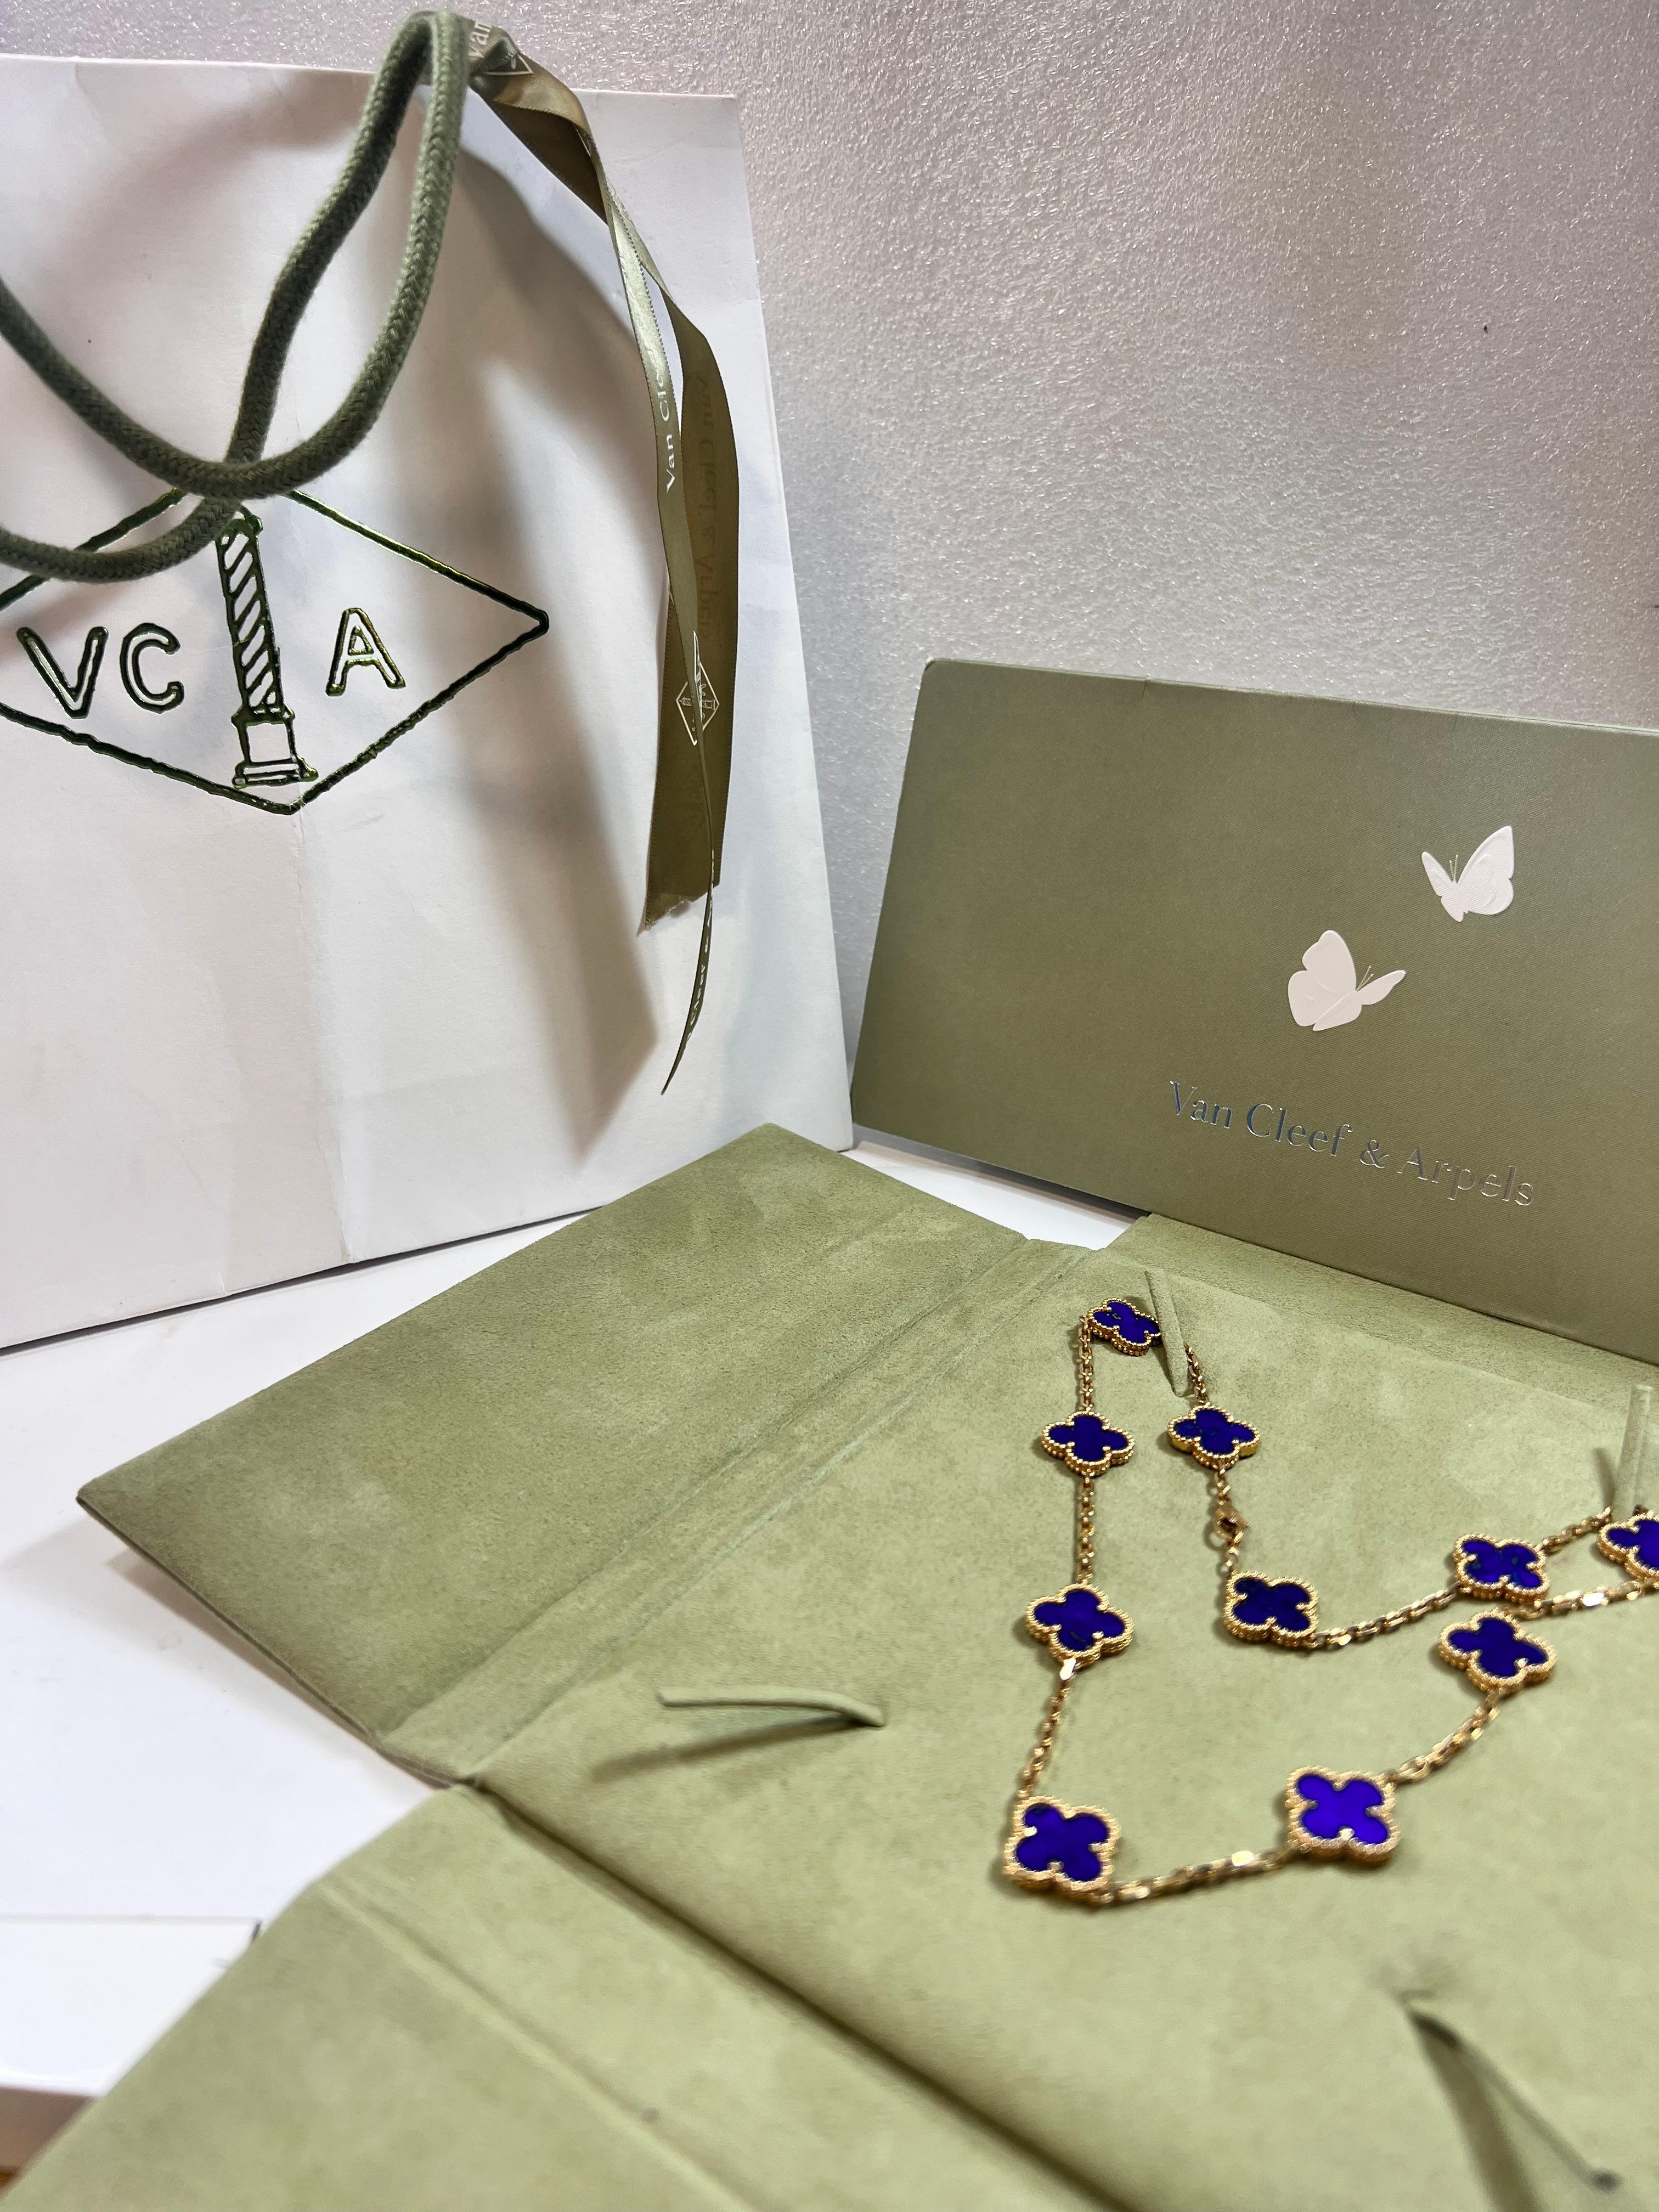 Vintage and out of production Van Cleef & Arpels necklace is crafted in 18k yellow gold and features 10 lucky clover motifs inlaid with lapis lazuli in round bead settings. Made in France circa 2000. Measurements: 0.59